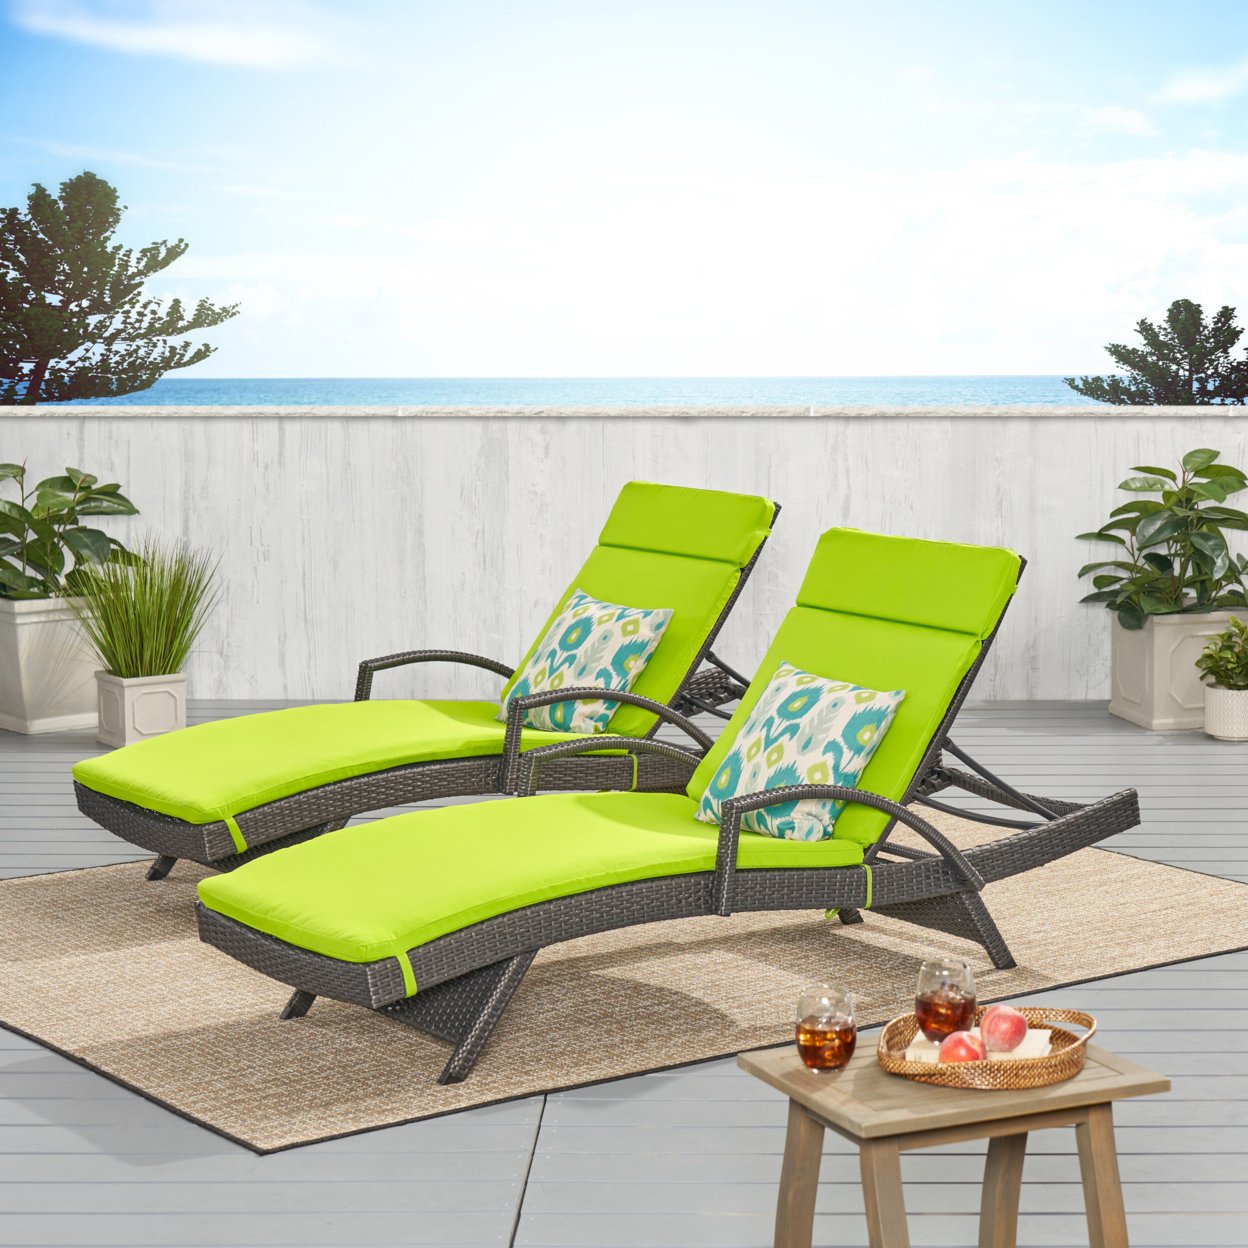 Soleil Outdoor Wicker Chaise Lounges With Water Resistant Cushions (Set Of 2) - Green